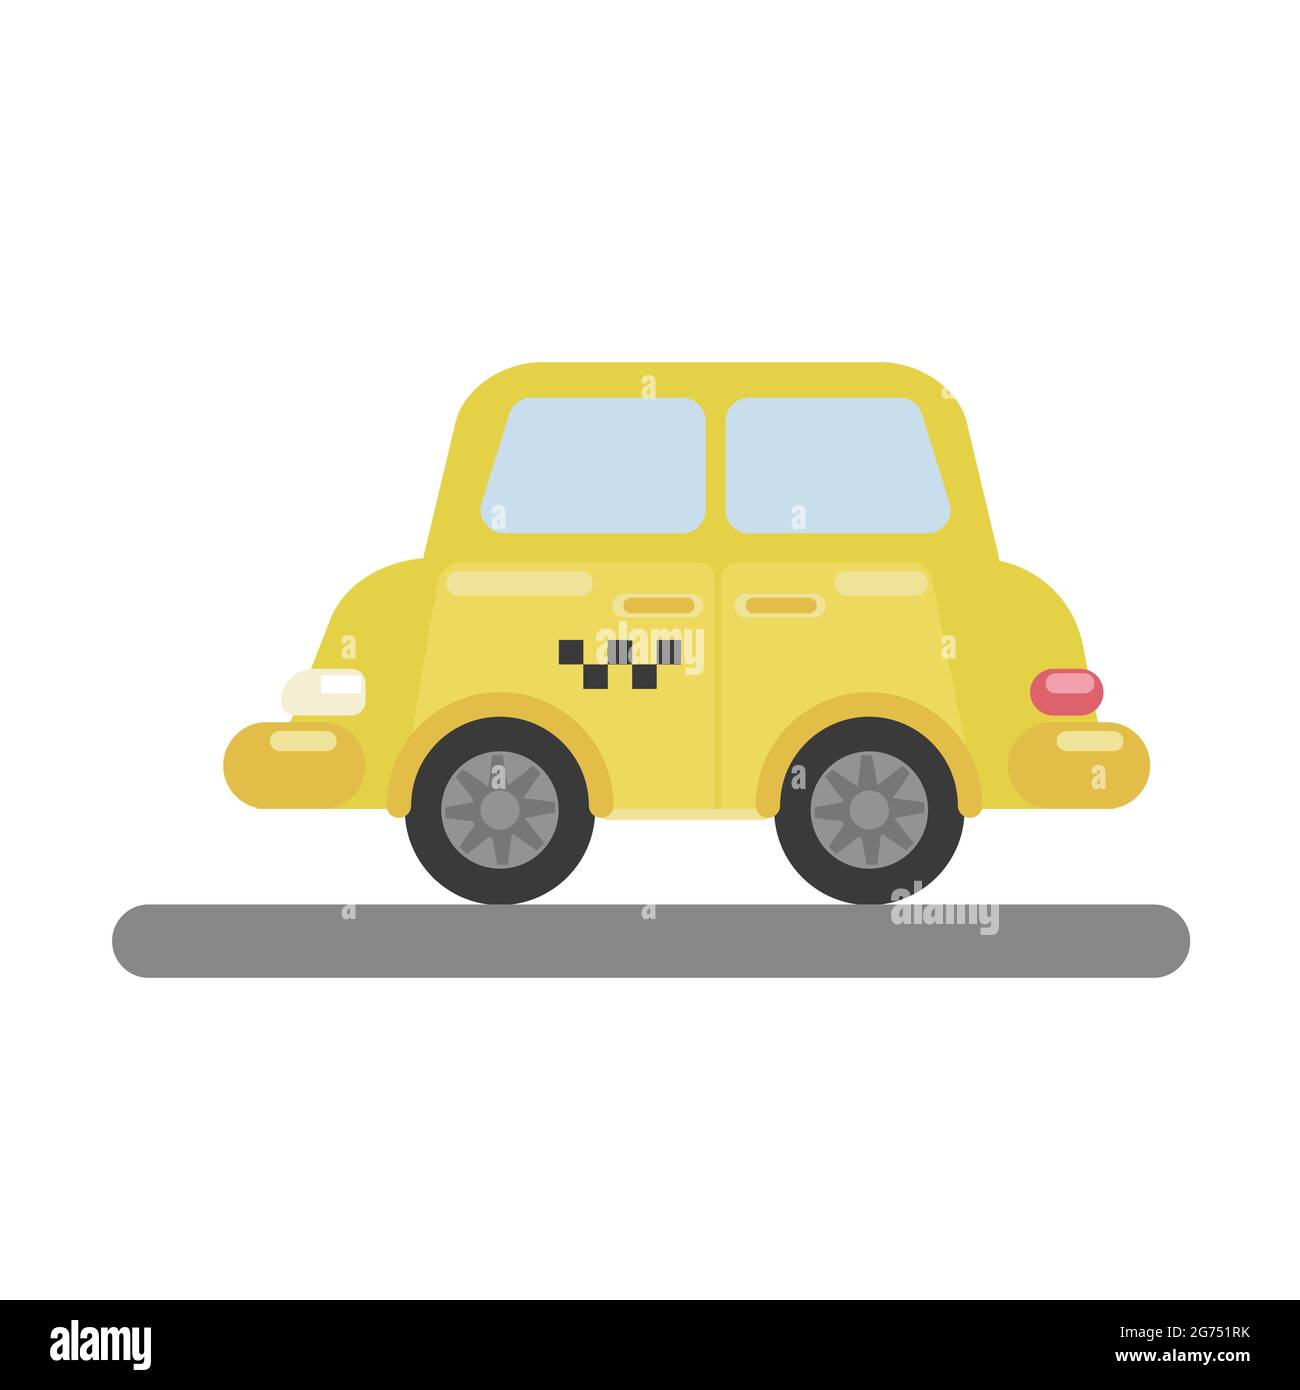 Colorful taxi icon isolated vector illustration Stock Vector